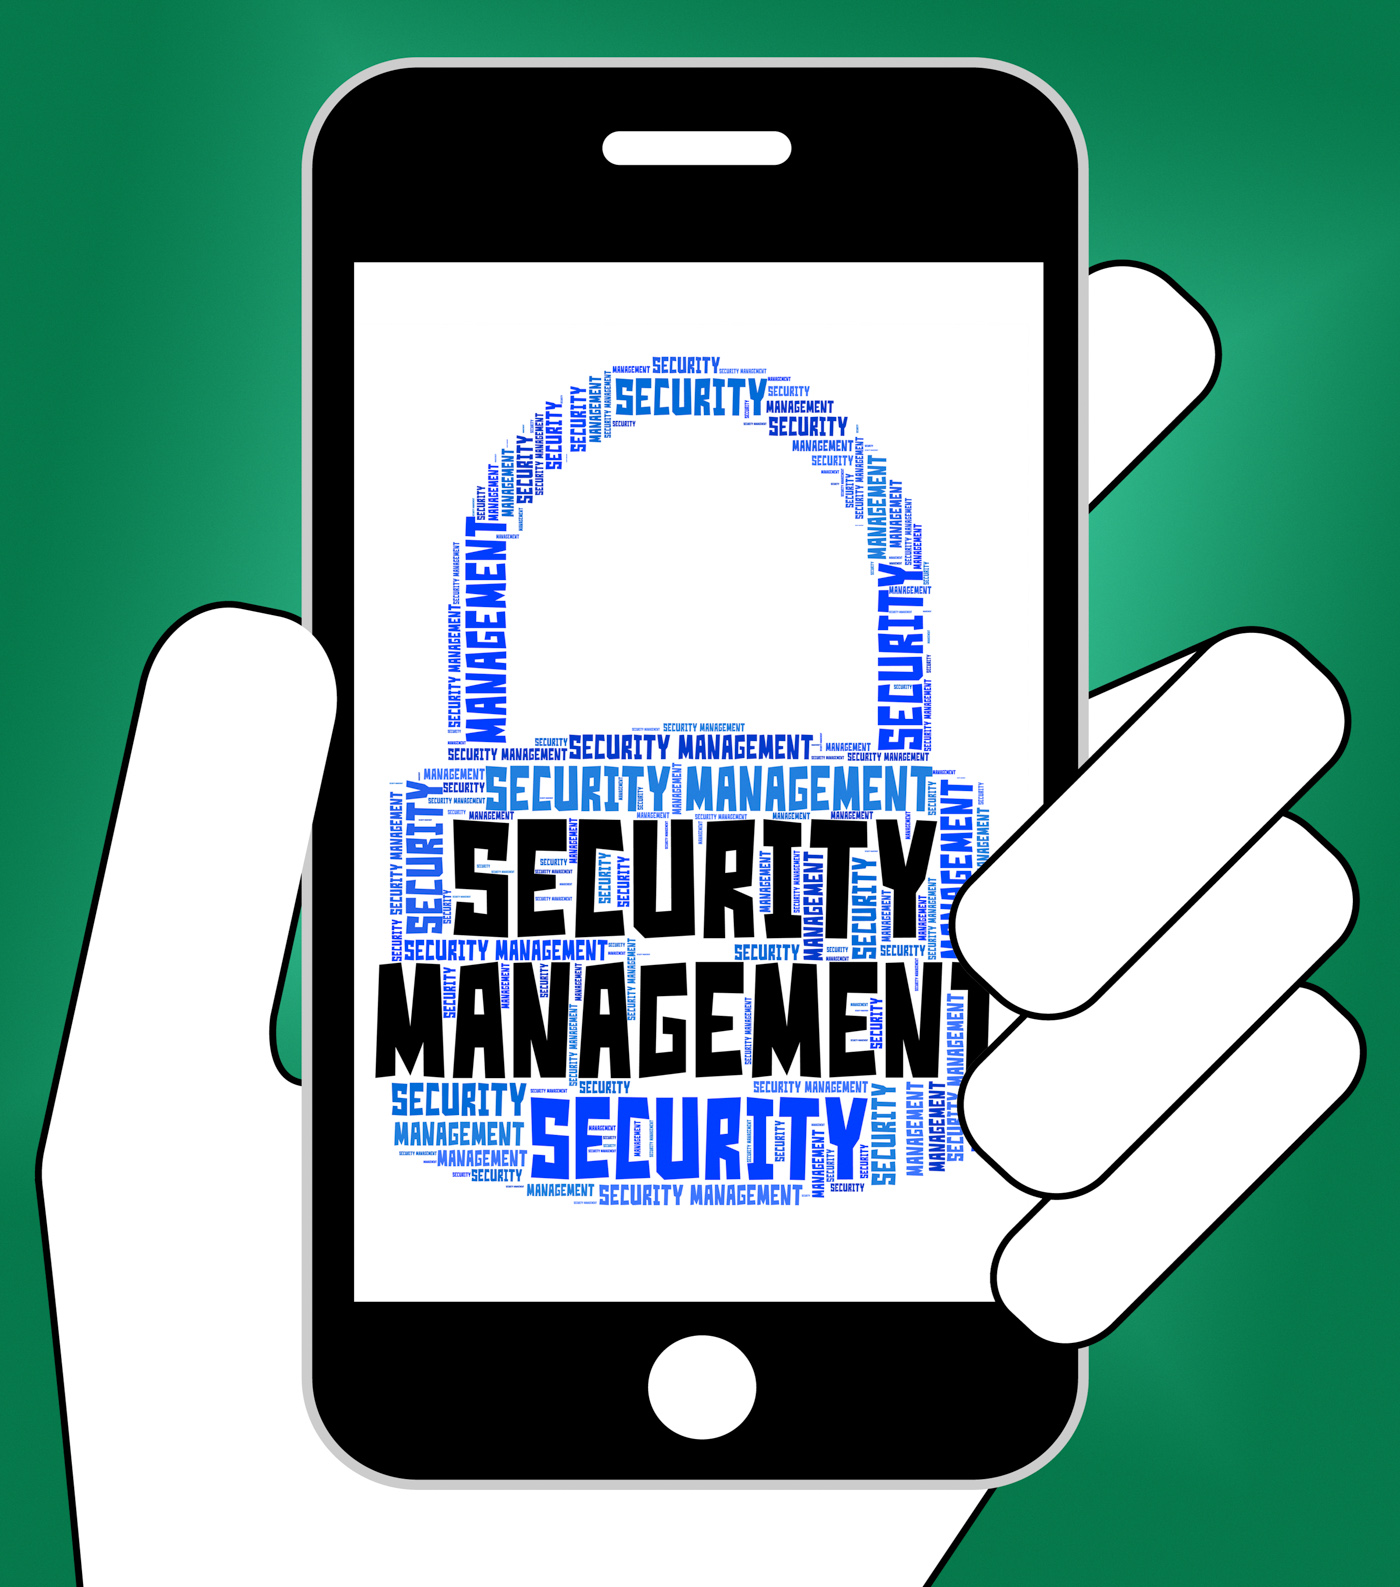 Security management represents secured wordcloud and organization photo